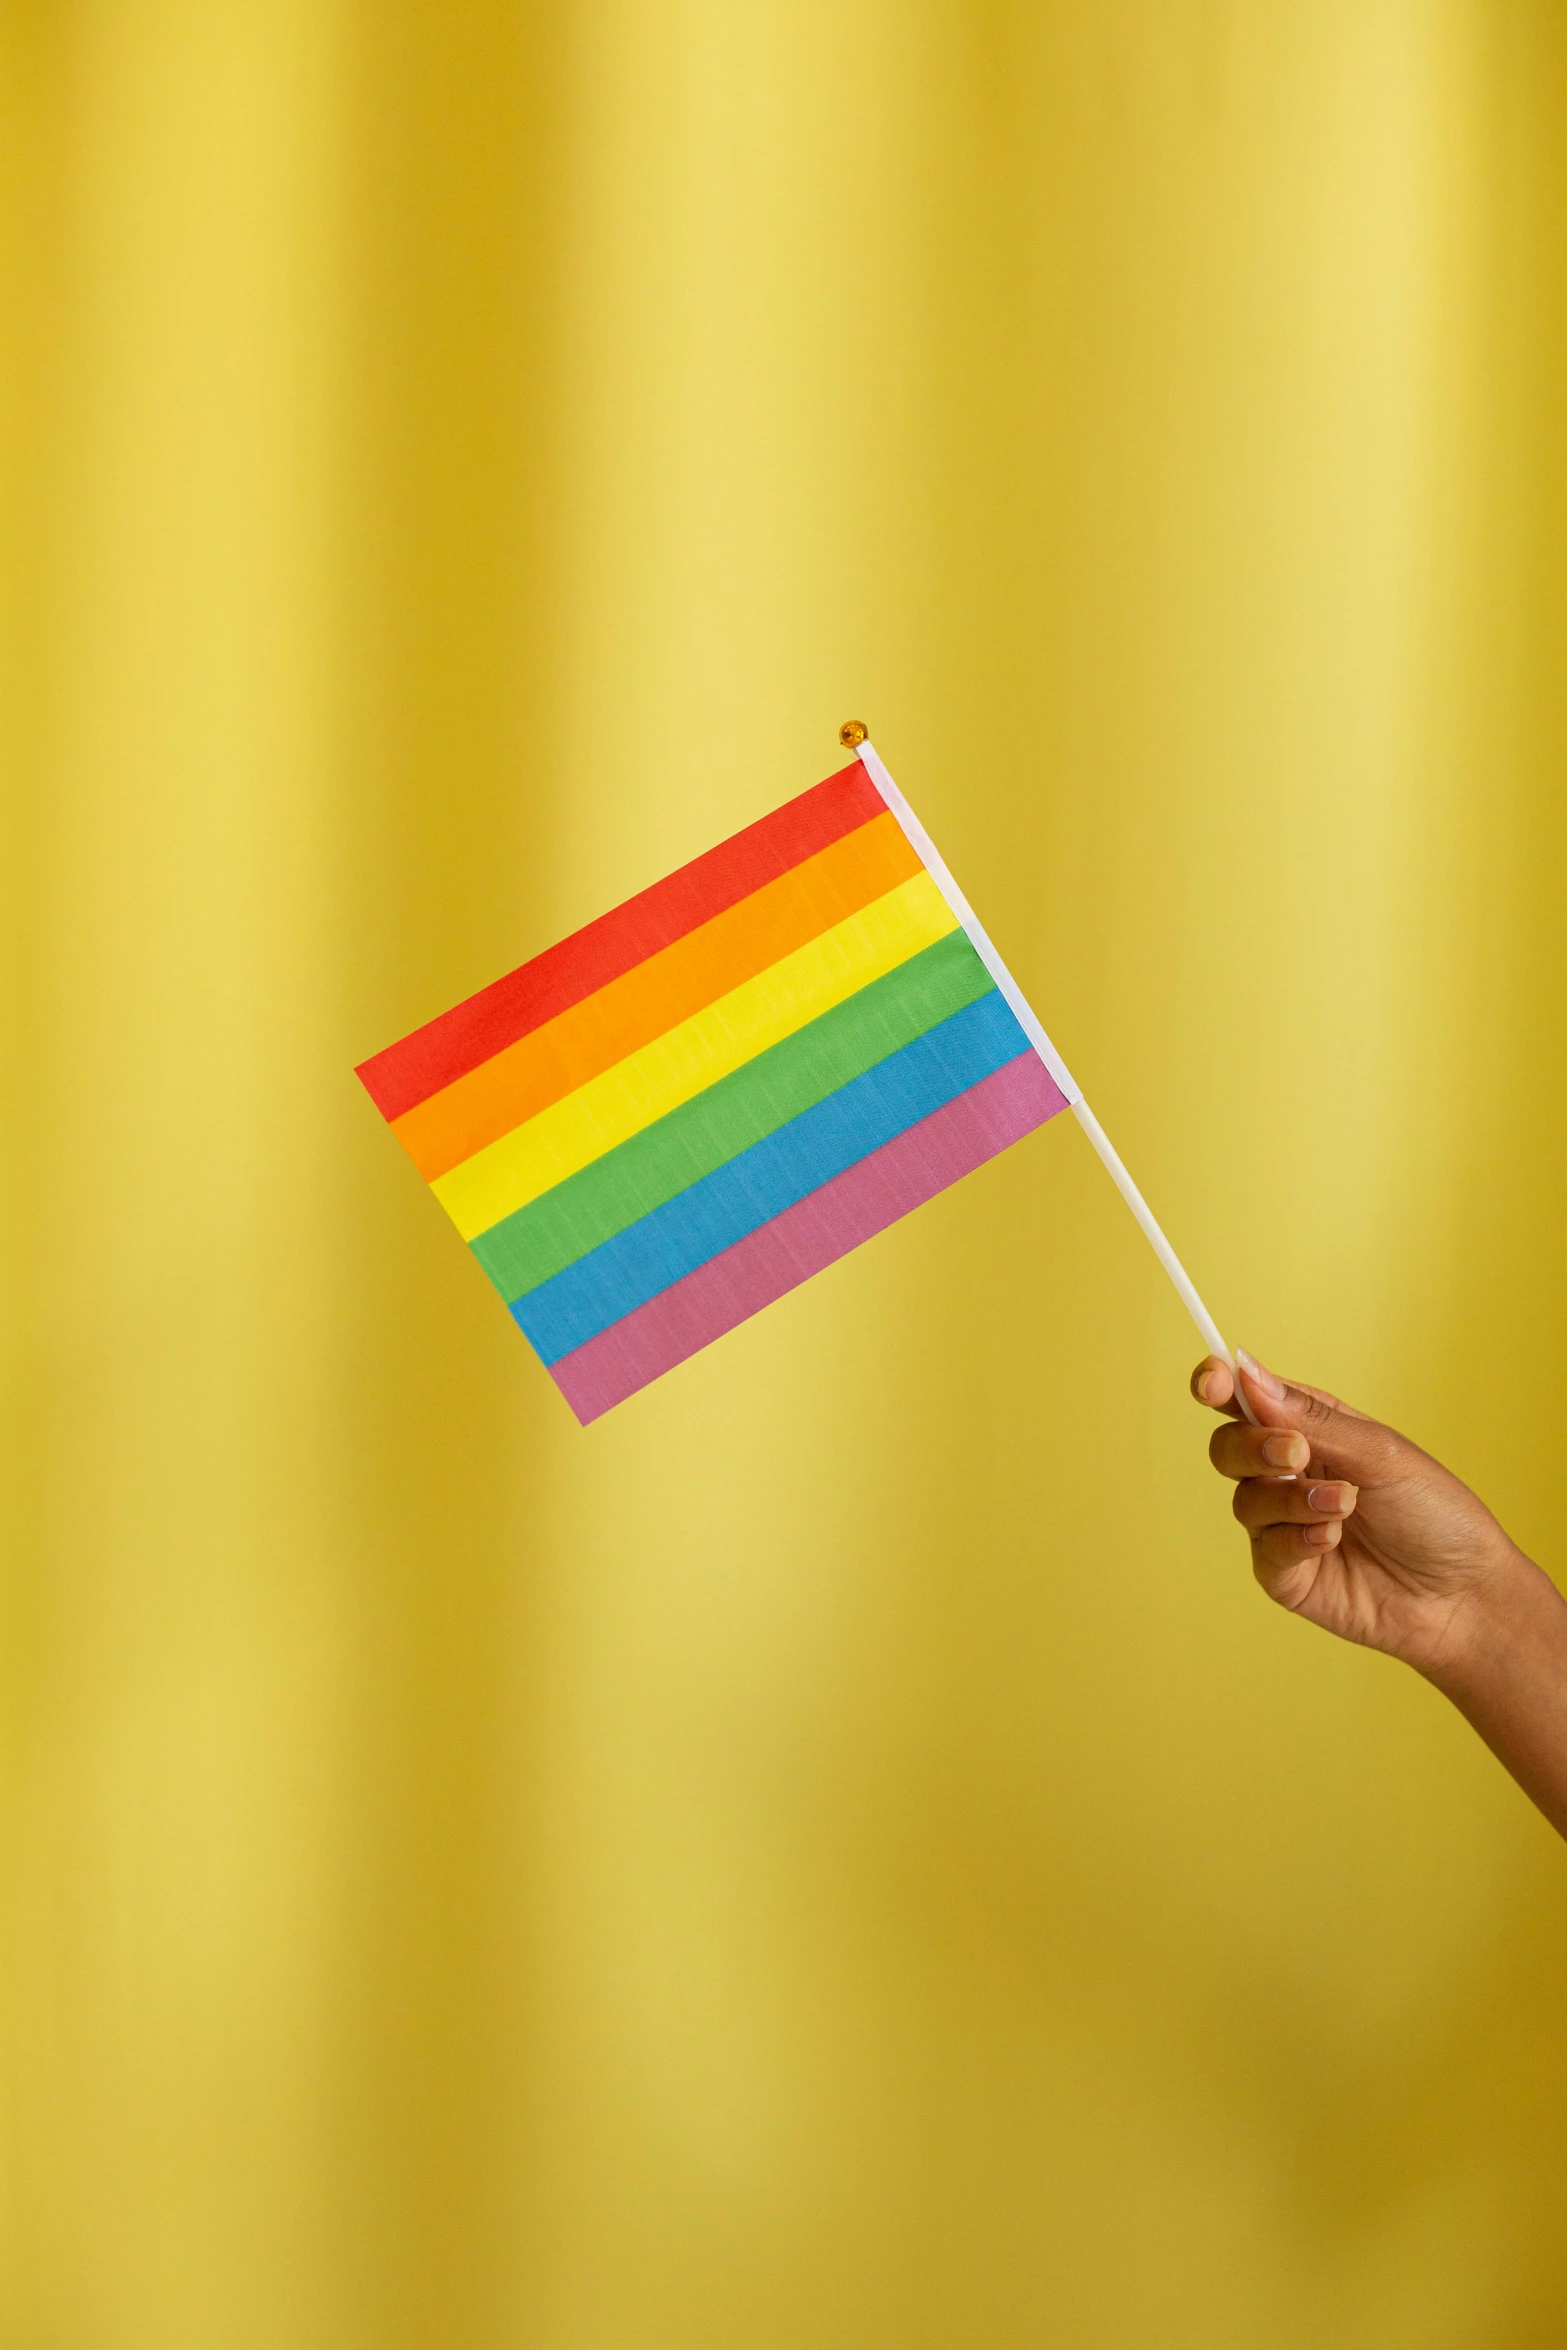 a person holding a rainbow flag against a yellow background, single long stick, we go, official product photo, paper